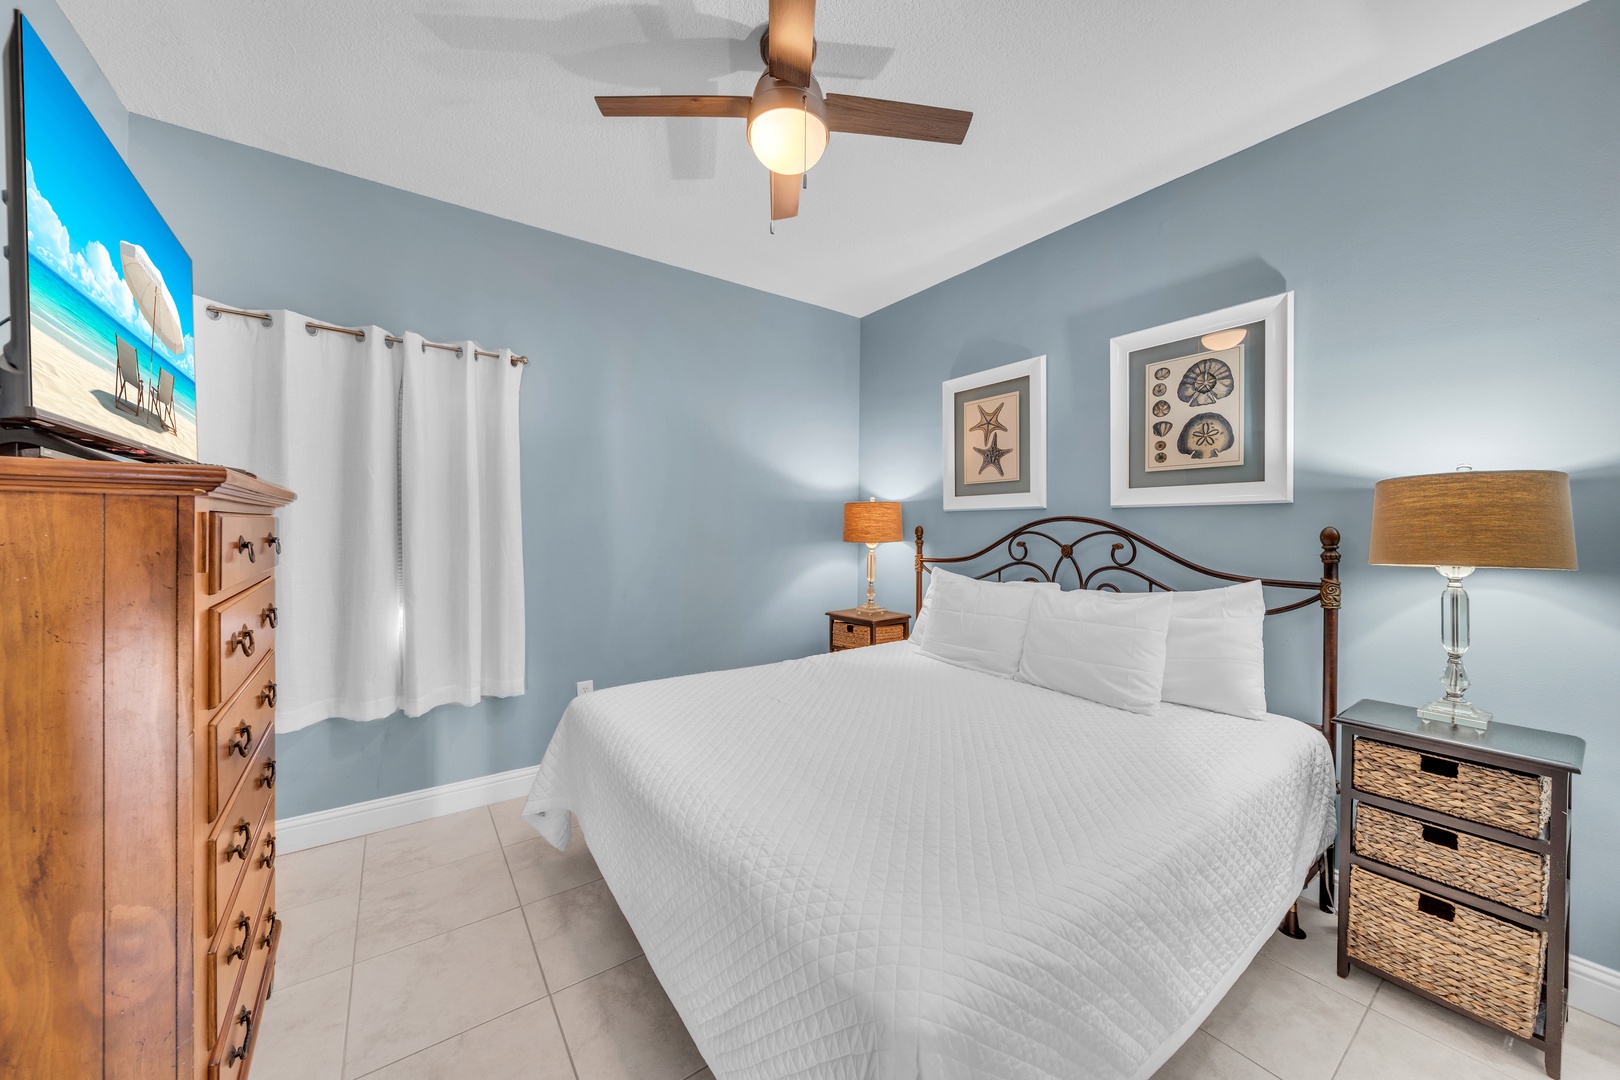 The guest bedroom echoes the luxury with its comfortable king bed.